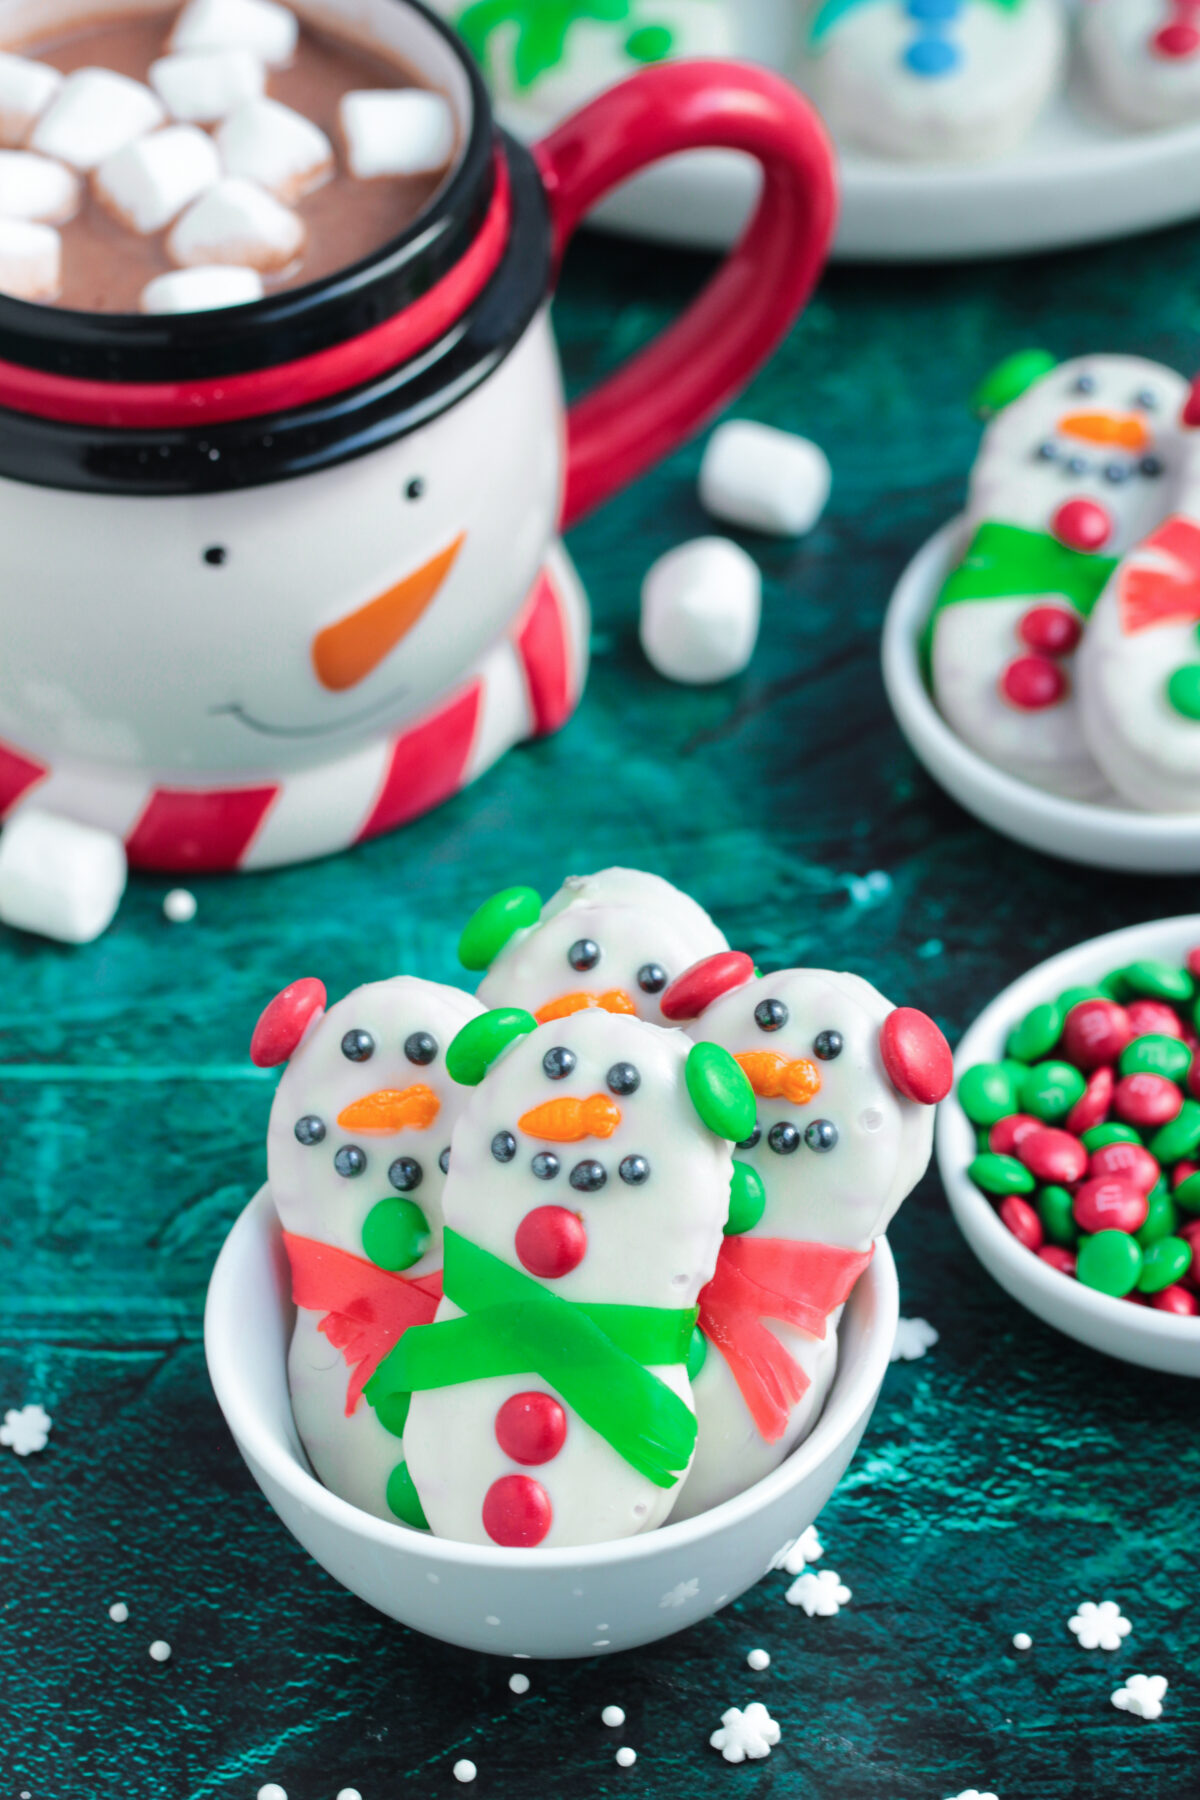 Get into the holiday spirit with these festive Nutter Butter snowmen! Follow our easy recipe for snowmen that are as cute as a button.